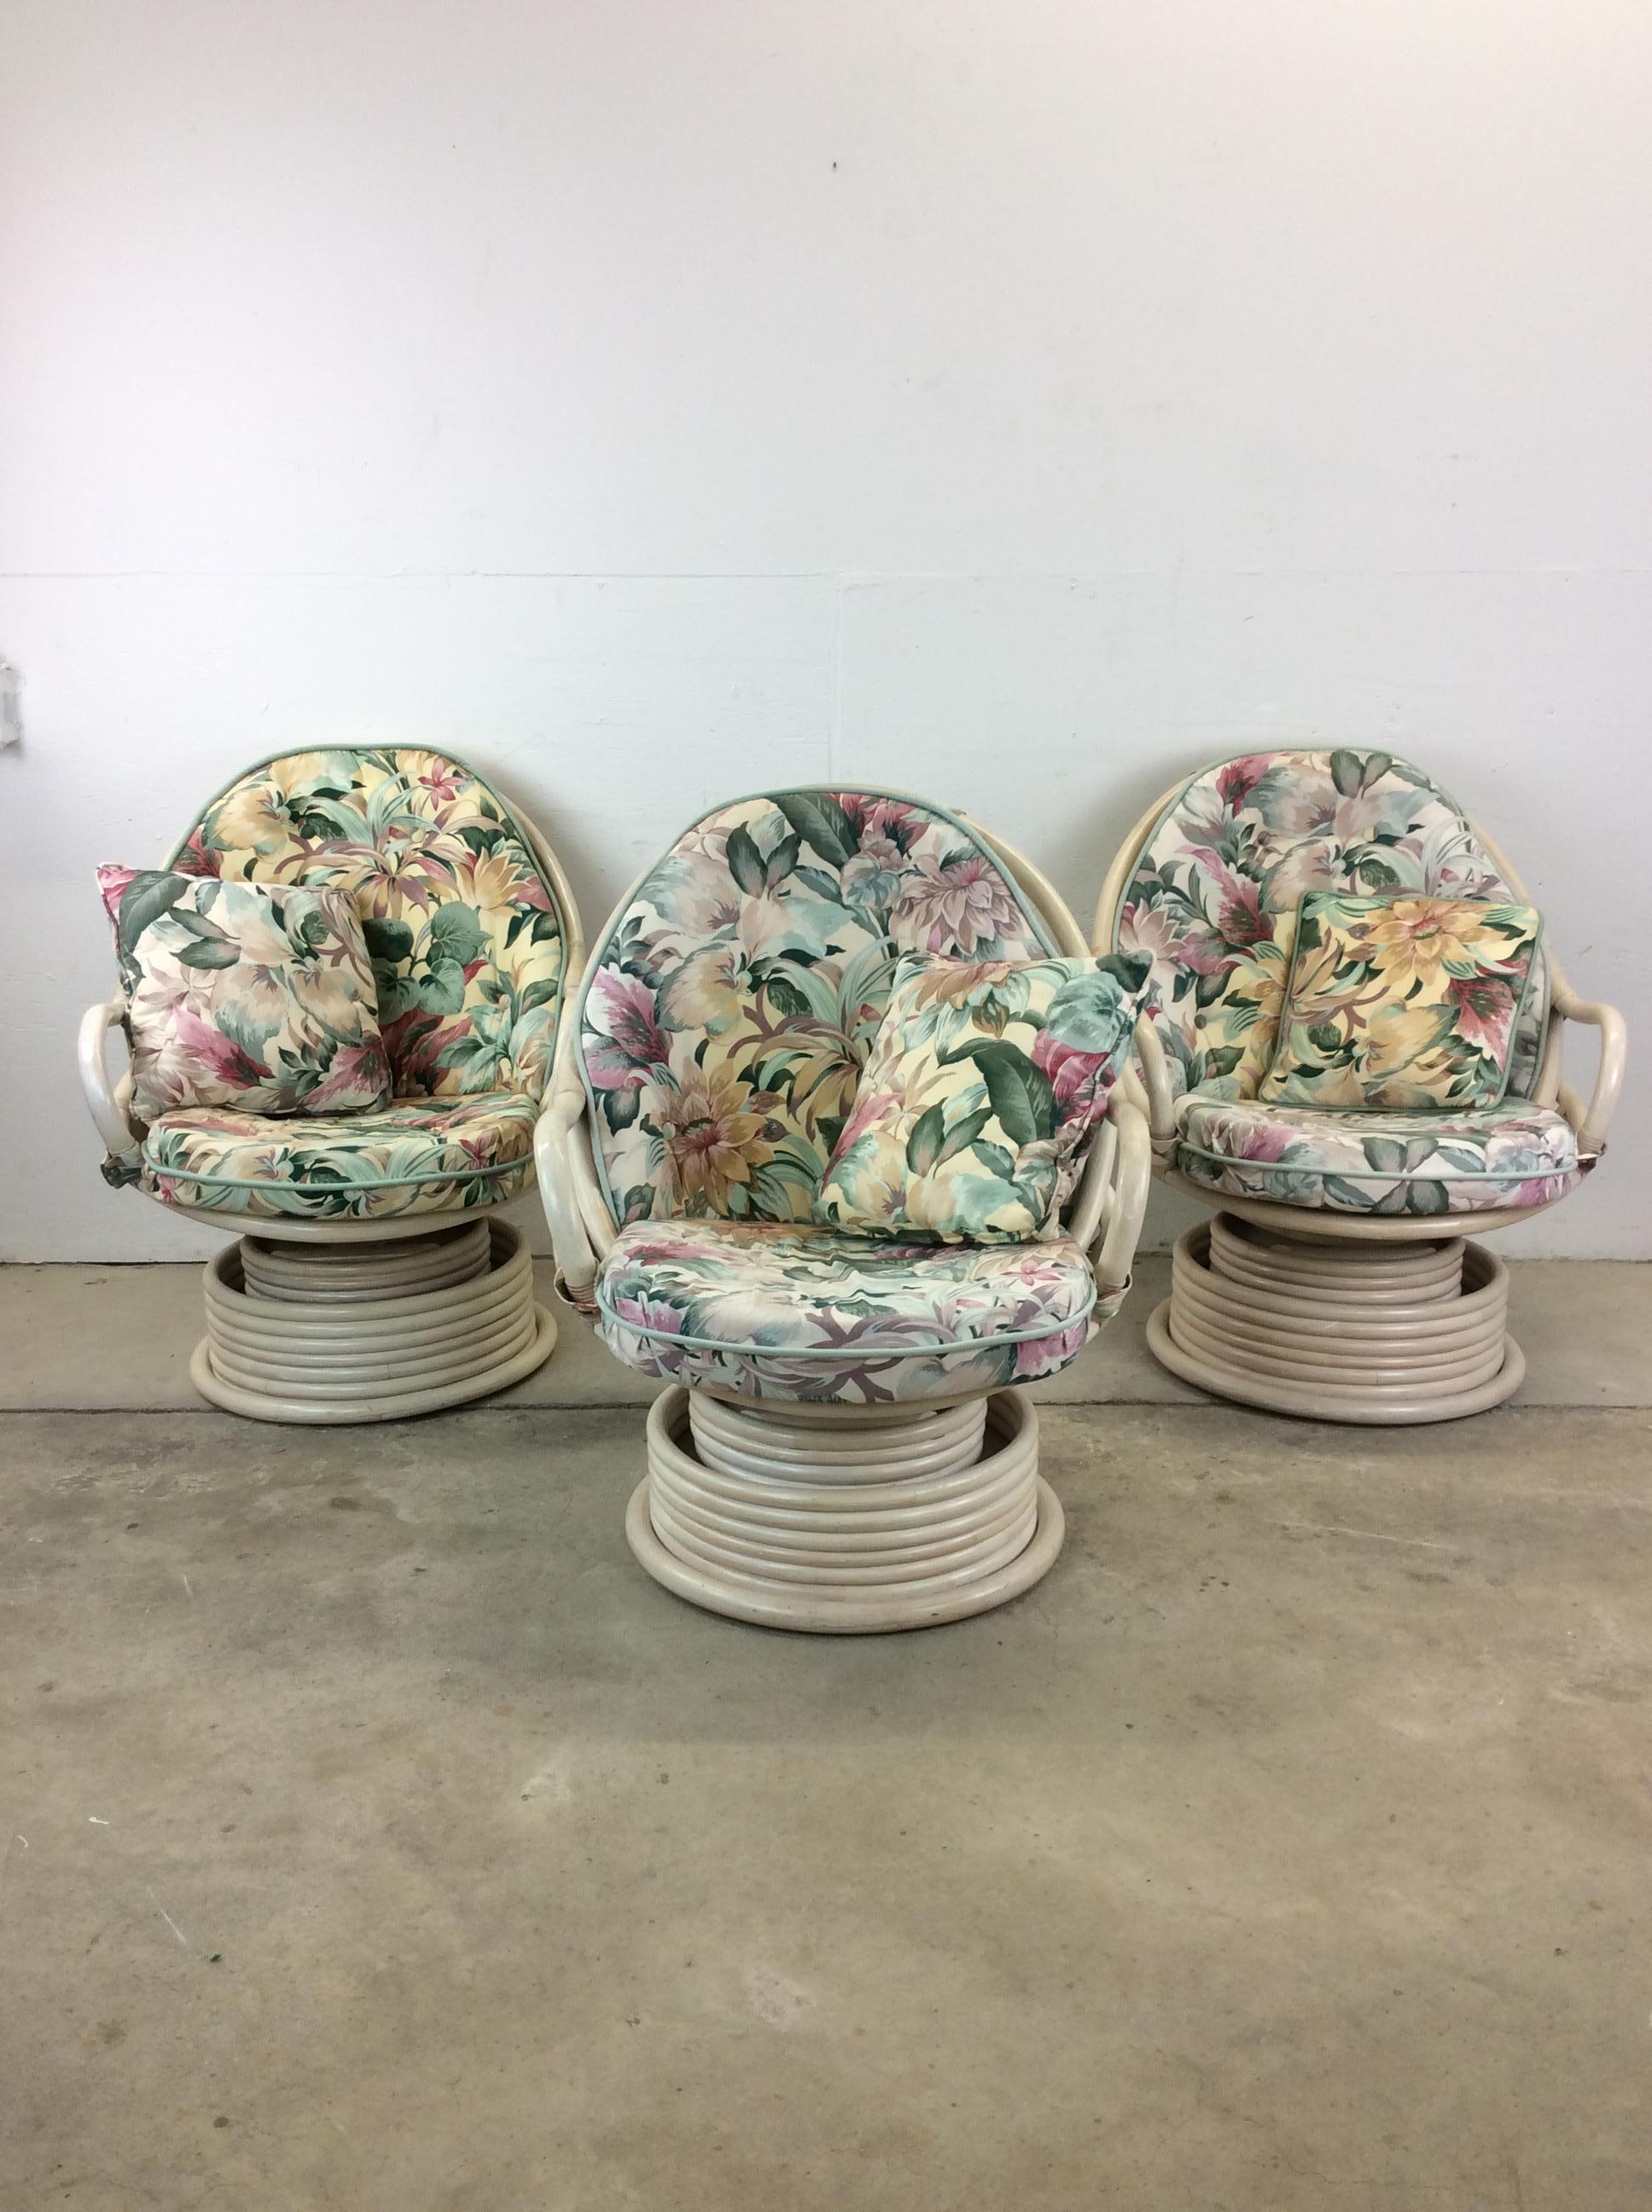 This set of 3 lounge chairs features solid rattan construction, original white washed finish, vintage floral upholstery, and swivel base.

Dimensions: 29w 24d 37h 19sh 23.5ah

Condition: Original. white washed finish is in good condition. Only minor